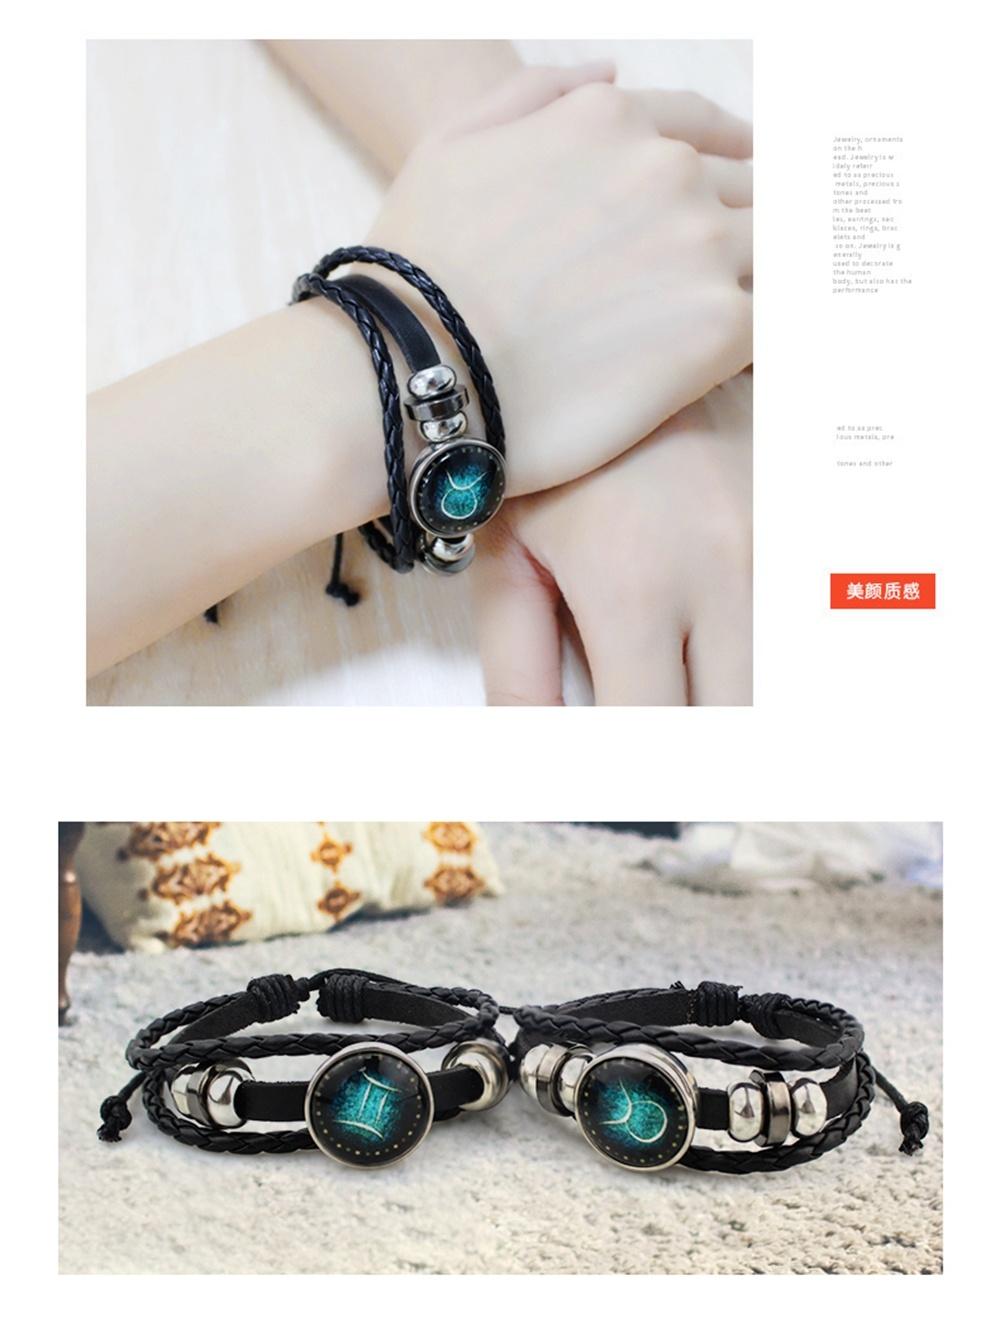 Top Selling Horoscop High Quality Personality Weaving Bracelet